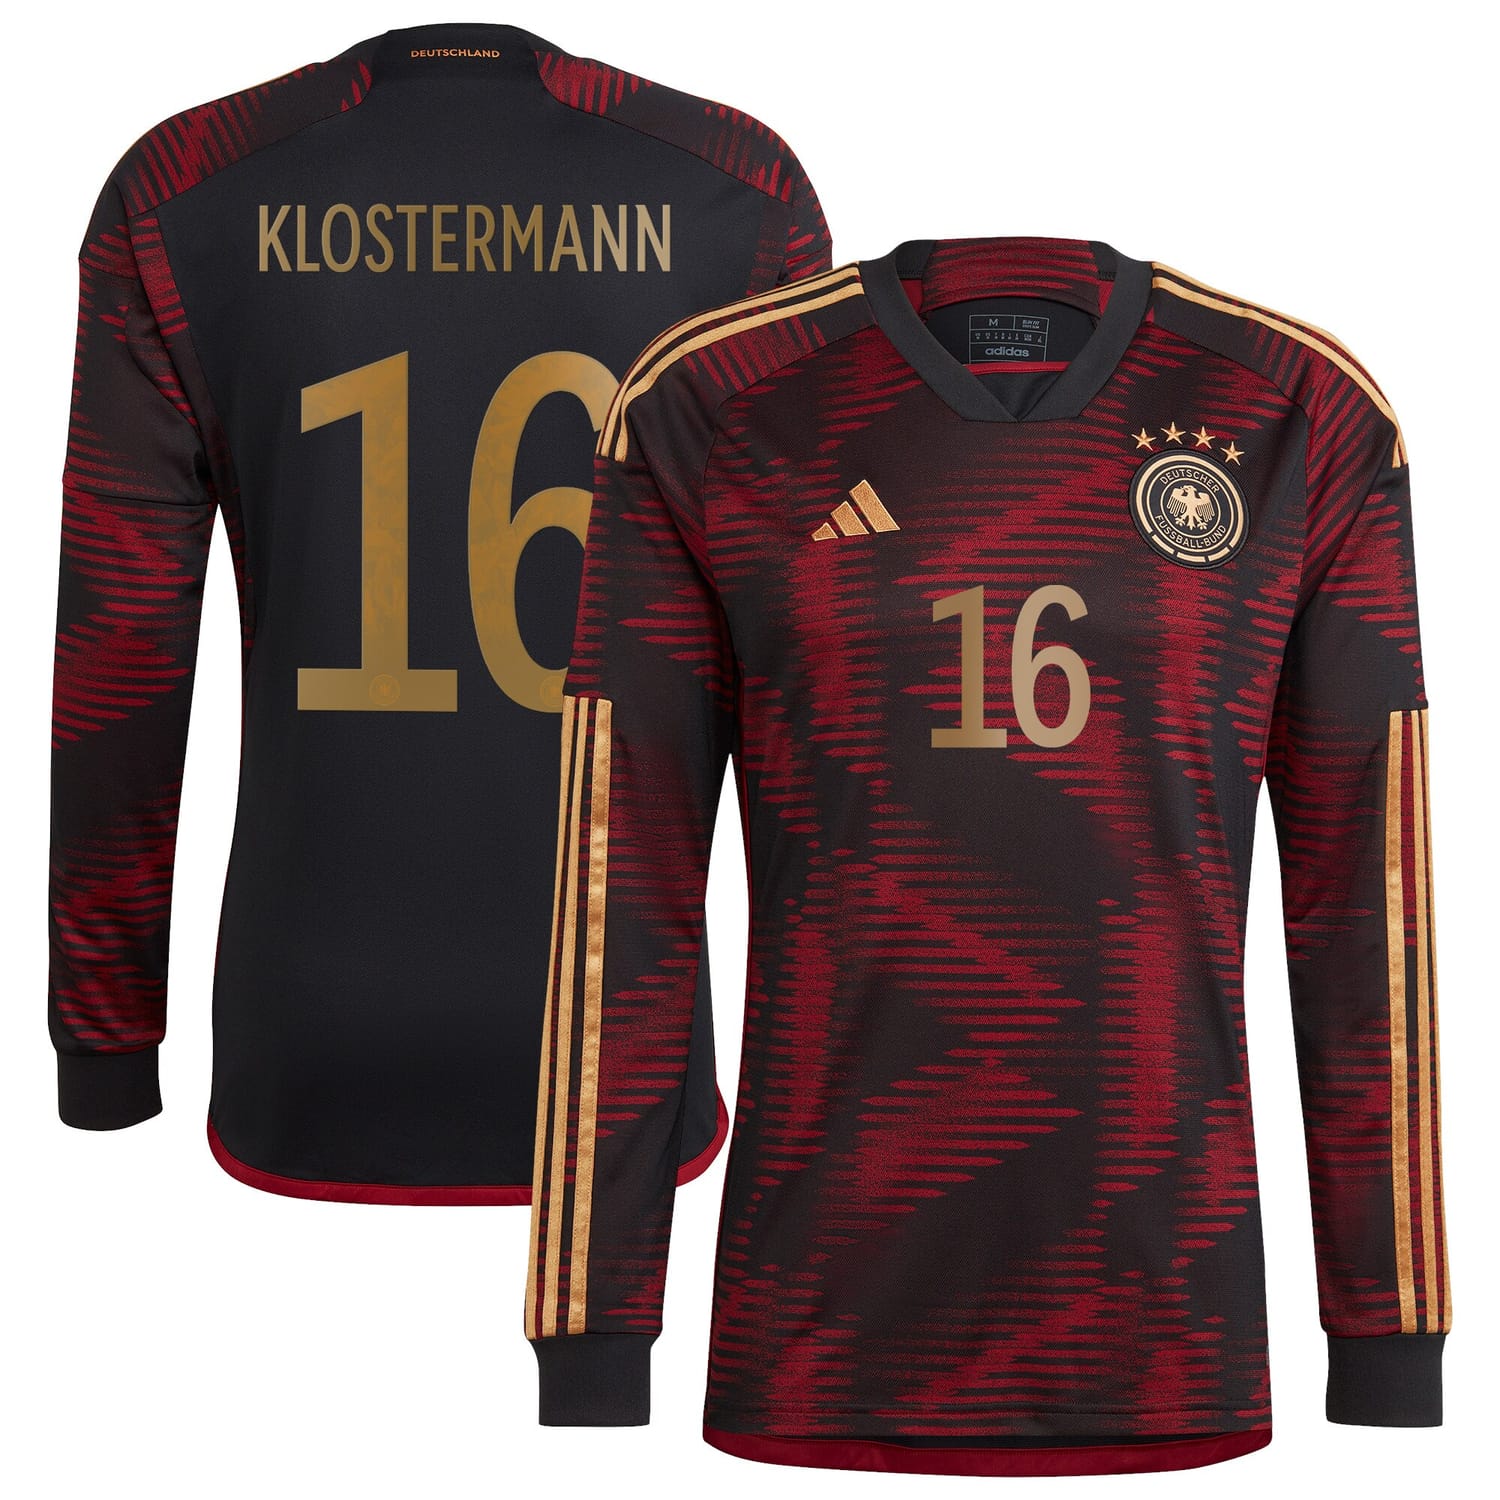 Germany National Team Away Jersey Shirt Long Sleeve player Lukas Klostermann 16 printing for Men